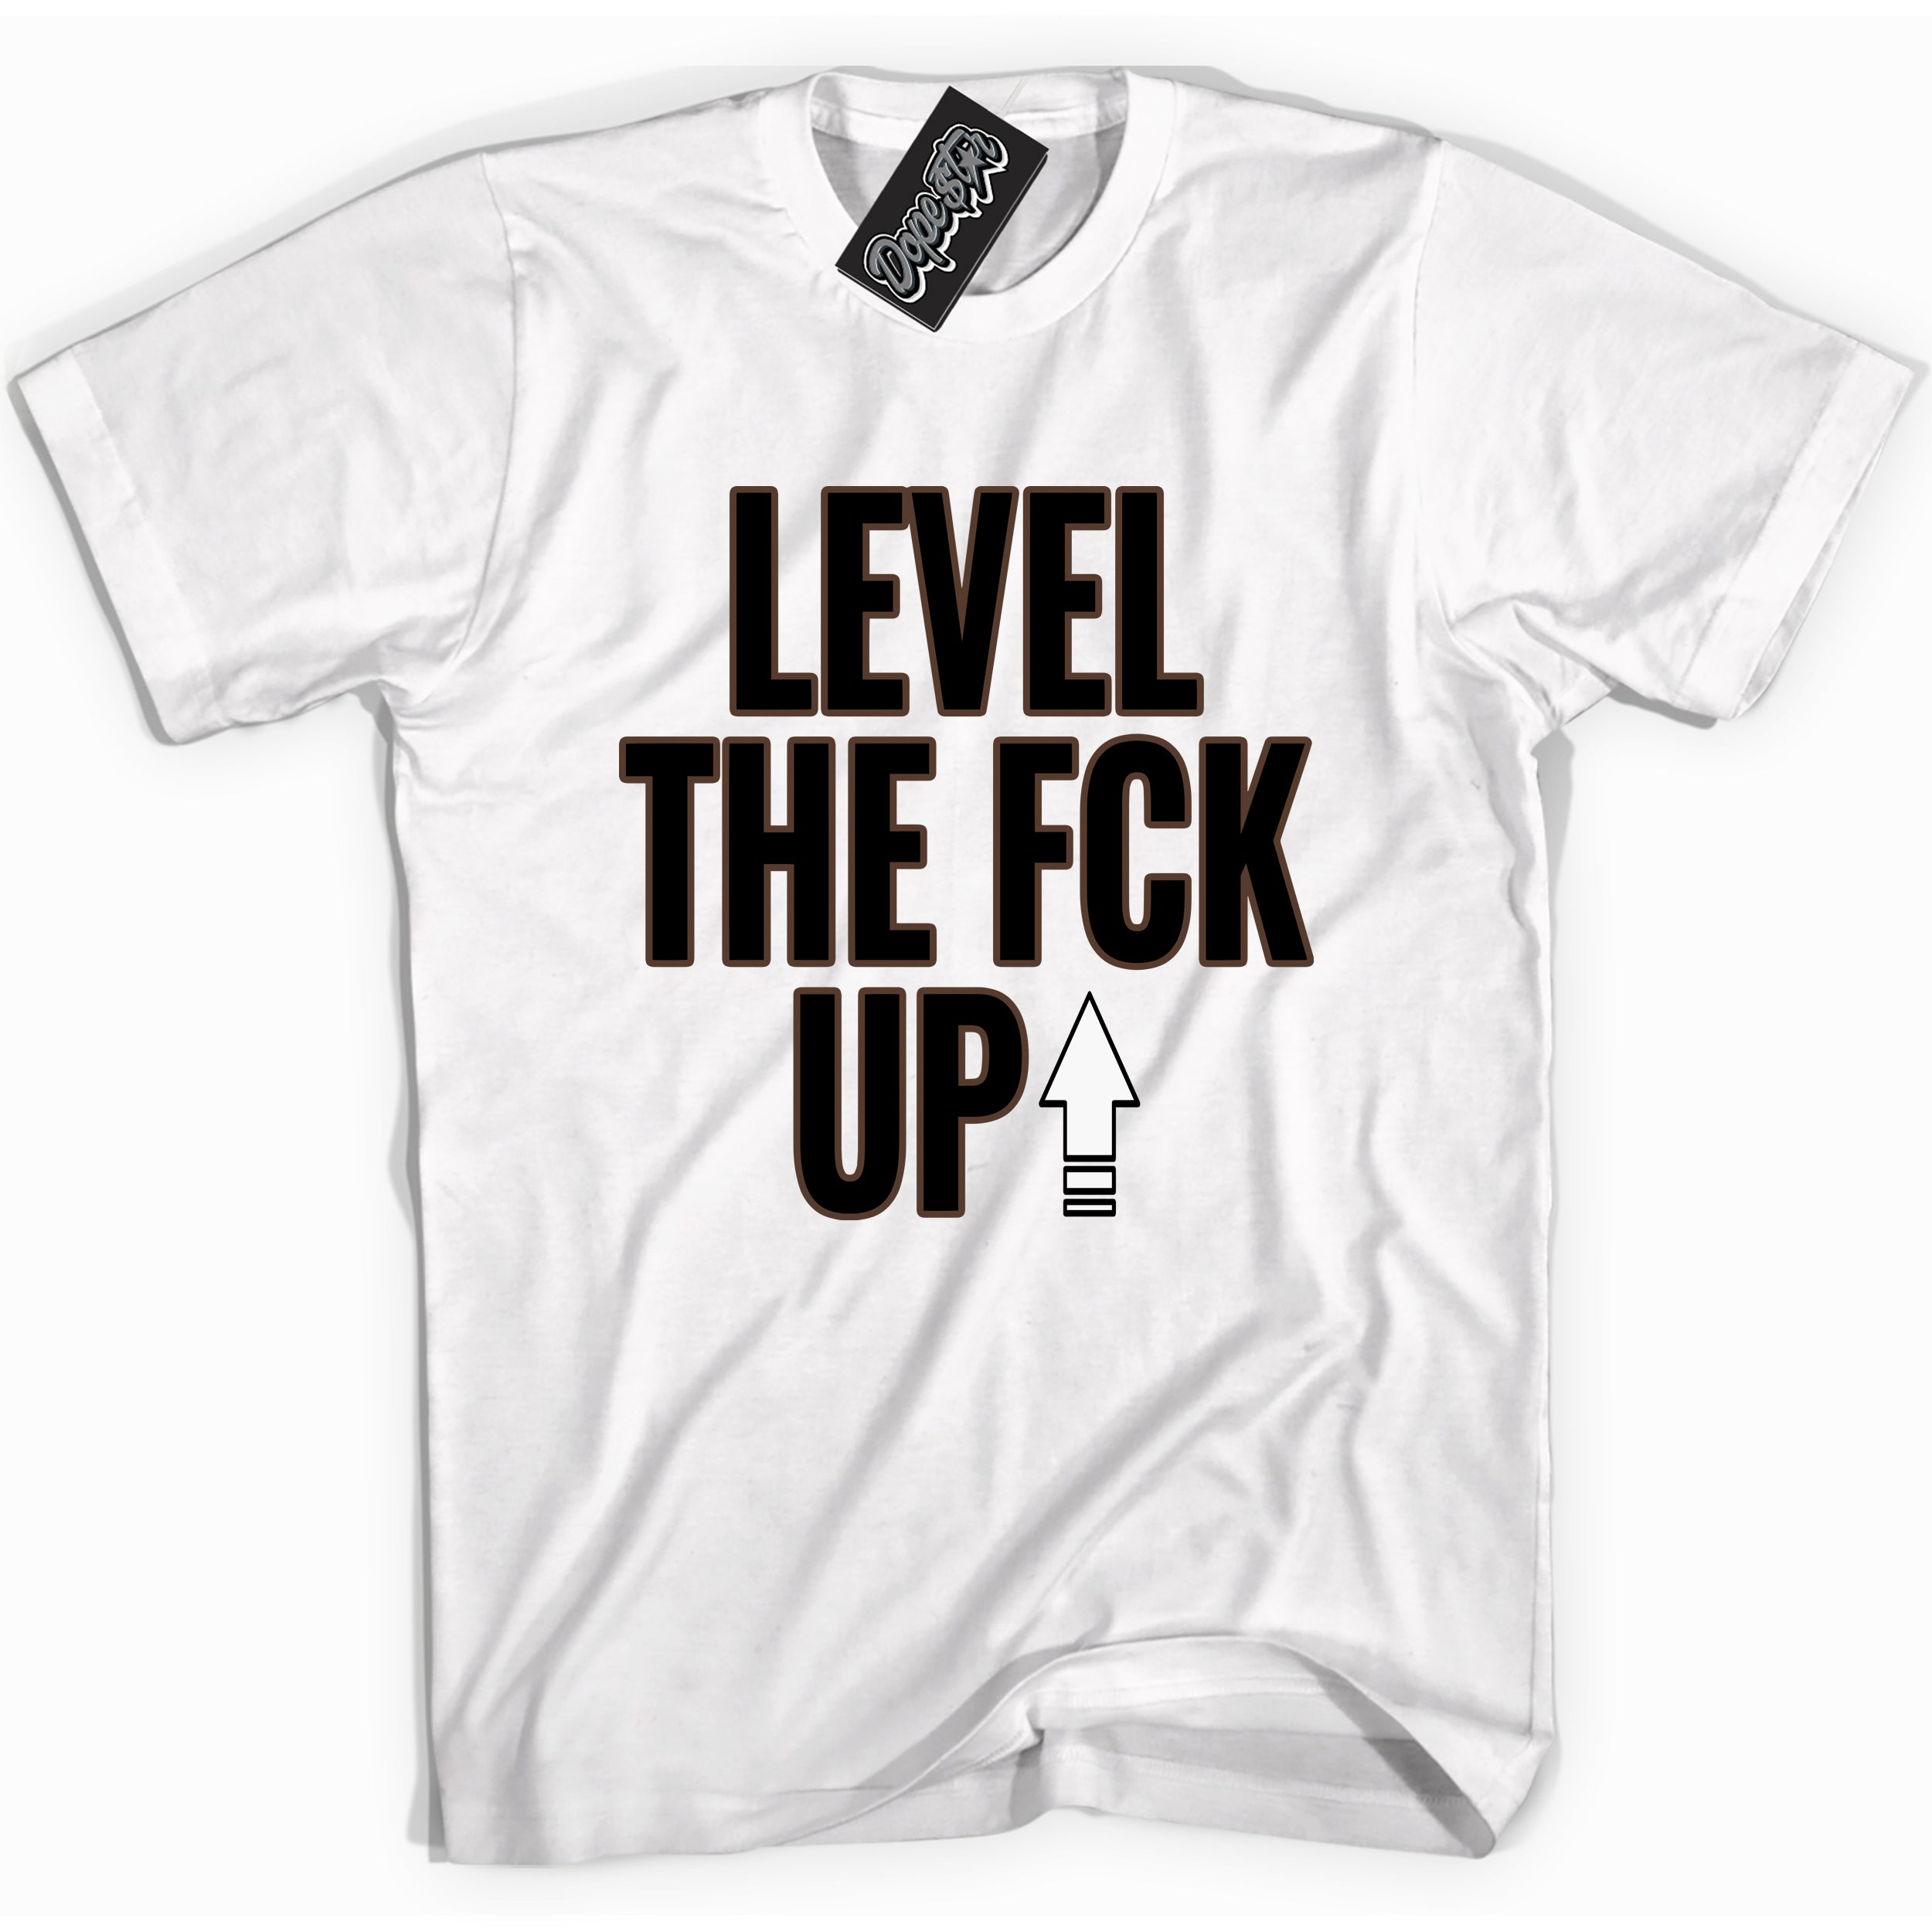 Cool White graphic tee with “ Level The Fck Up ” design, that perfectly matches Palomino 1s sneakers 